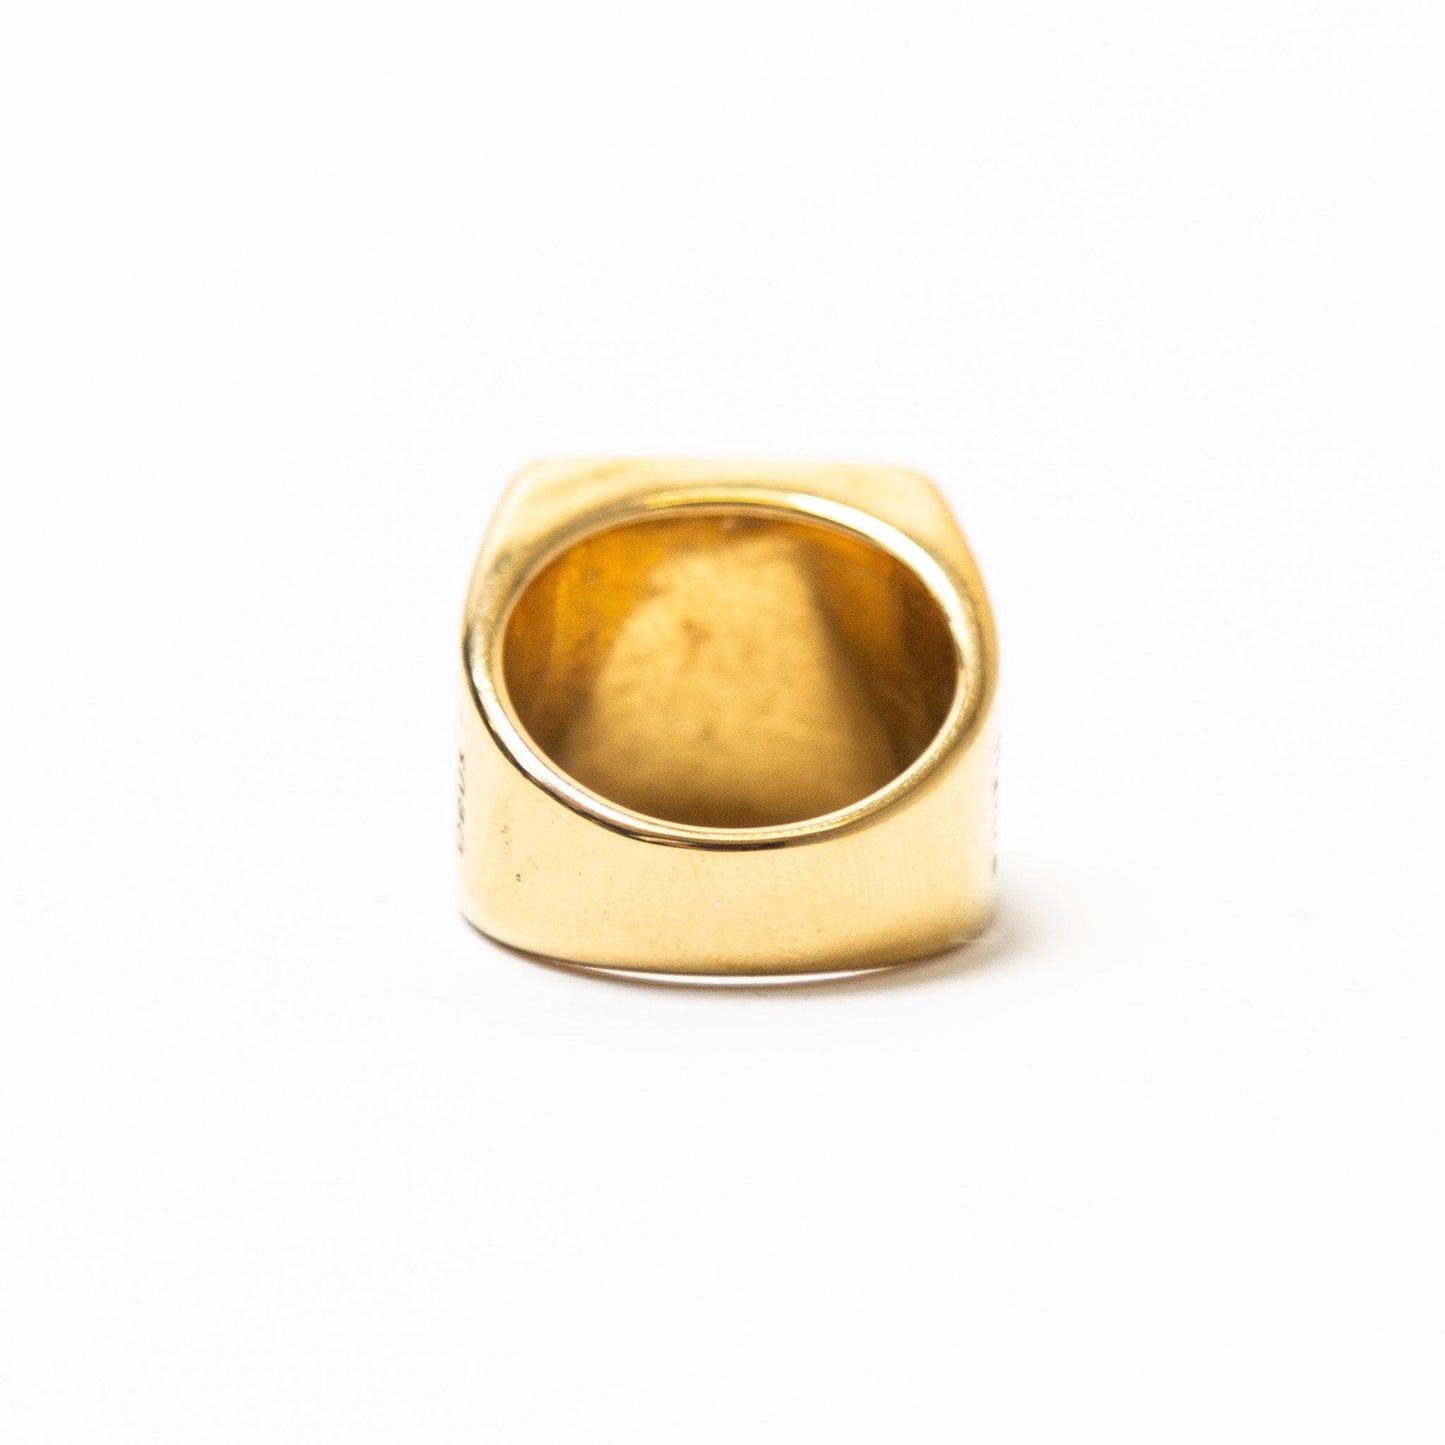 ST George Signet Ring - Known Source